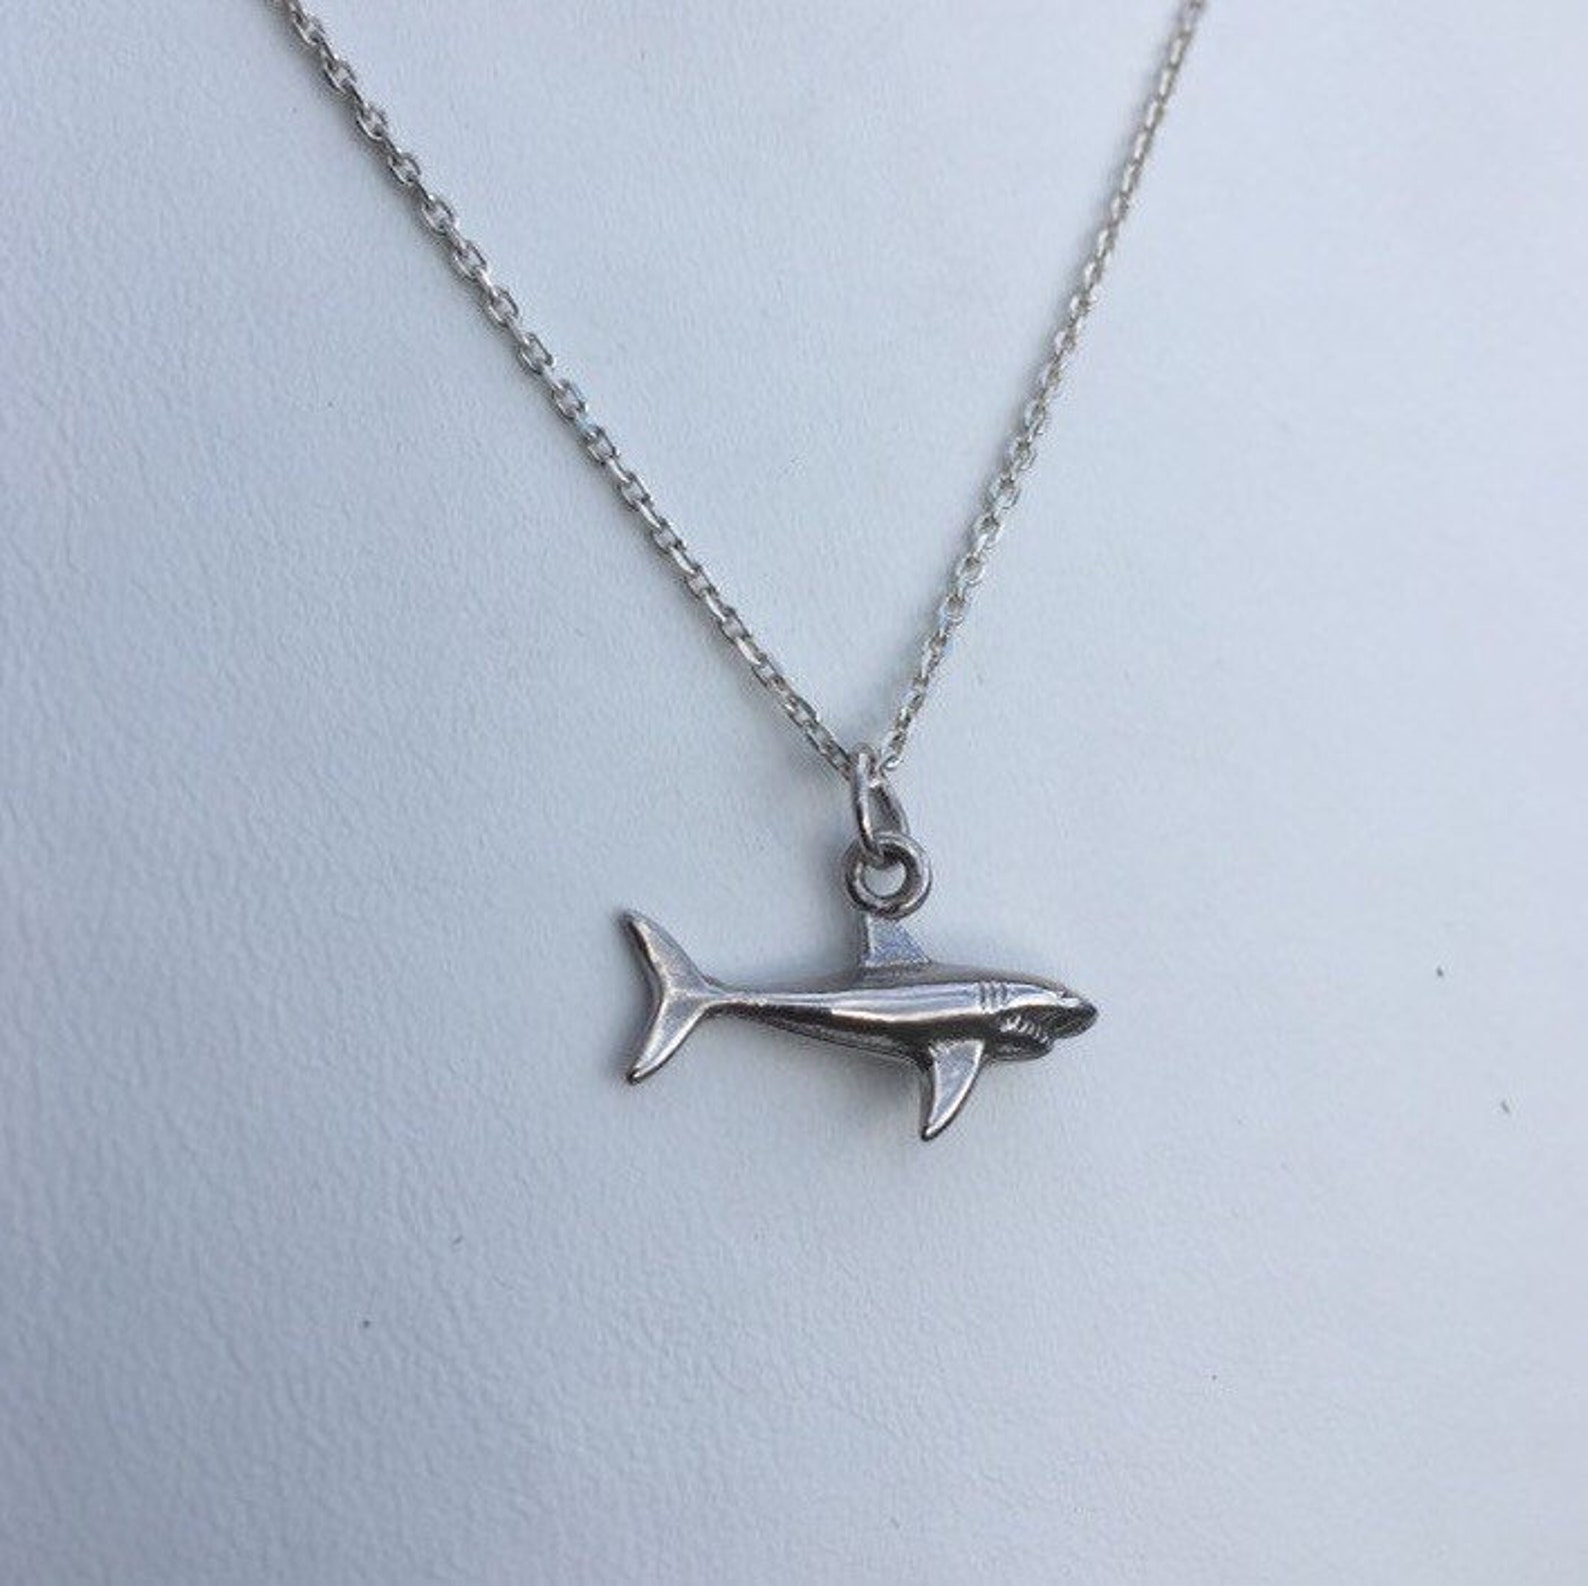 925 Sterling Silver Shark Pendant and Chain. Aquatic Great White Jaws ...